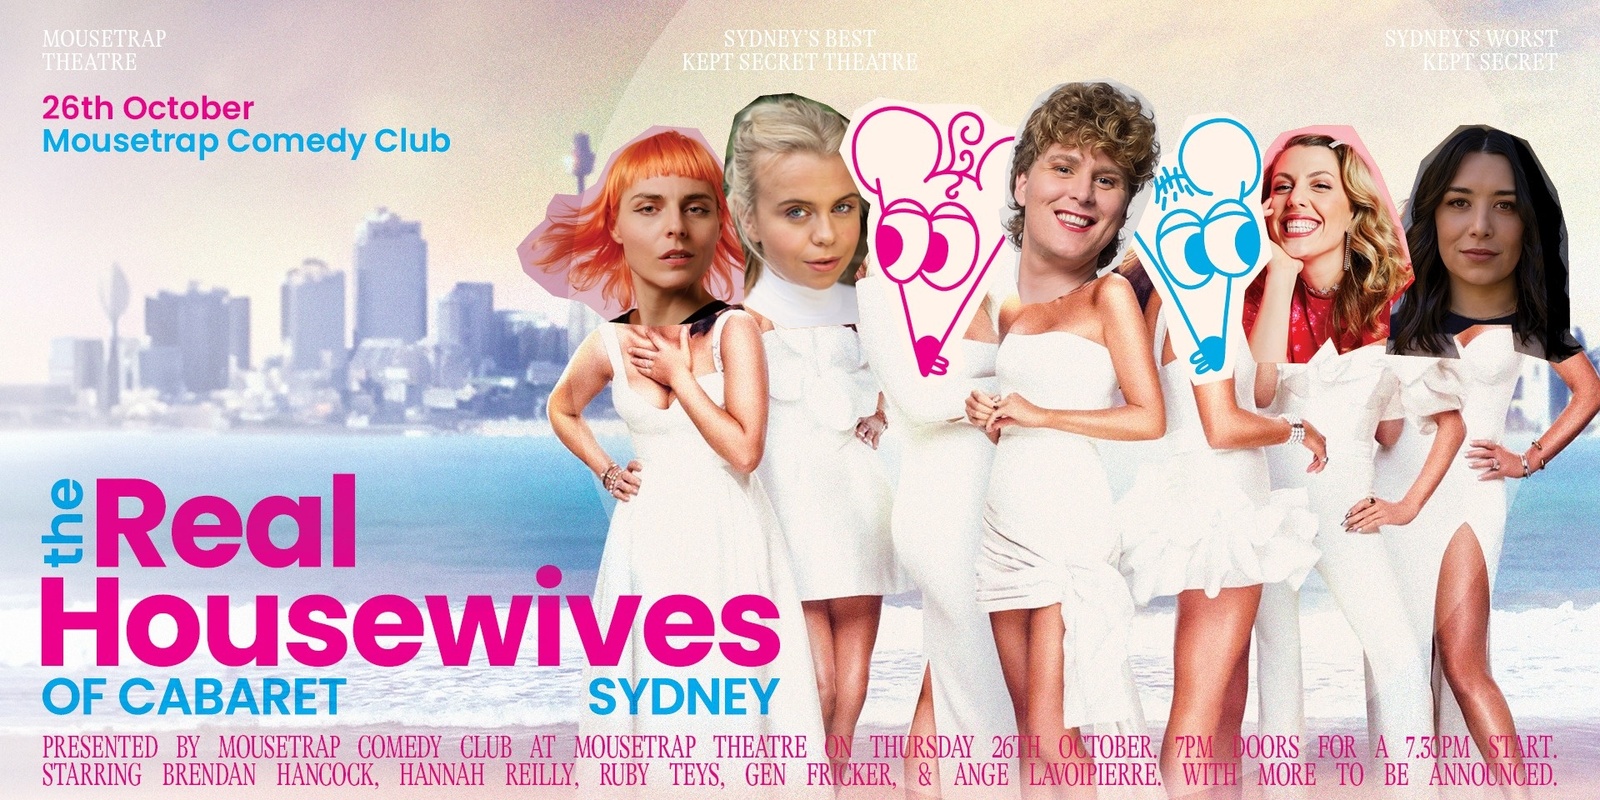 Banner image for The Real Housewives of Cabaret, Sydney